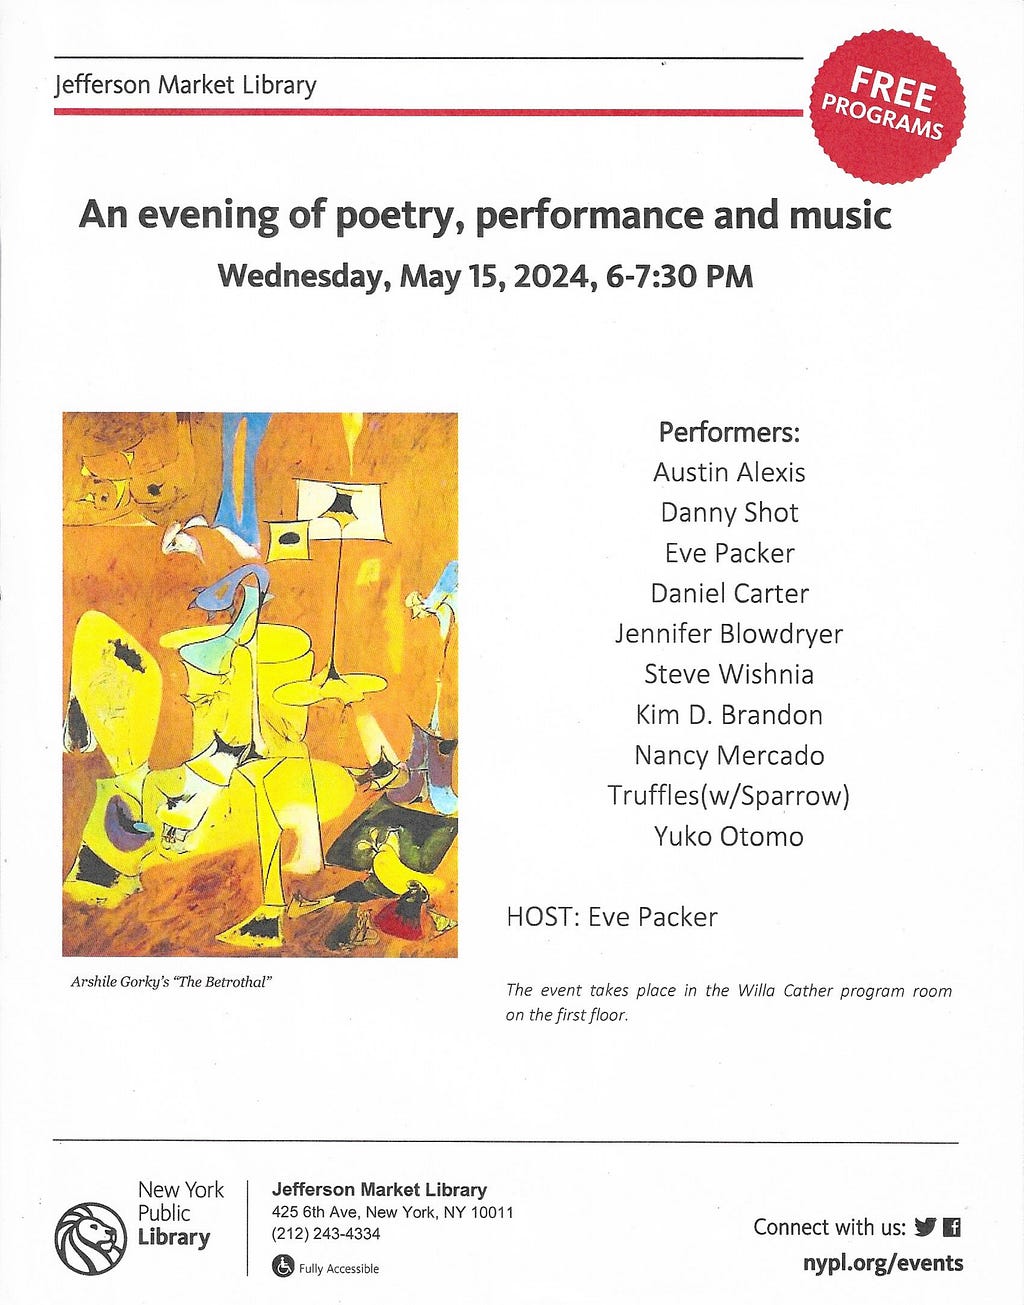 Library flyer advertising a music and poetry night